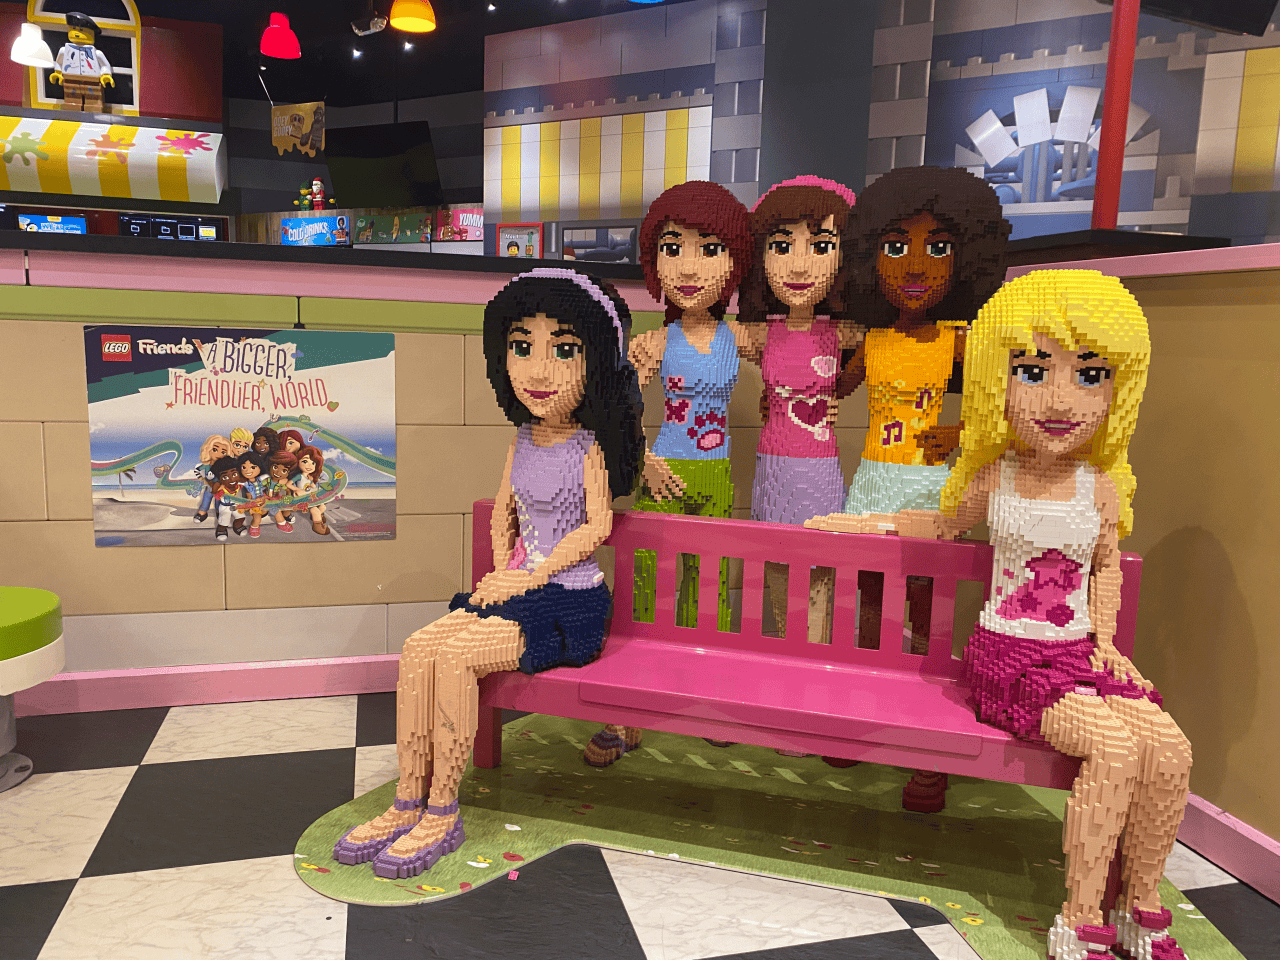 There are many Lego Friends throughout the attraction at the Legoland Discovery Center.